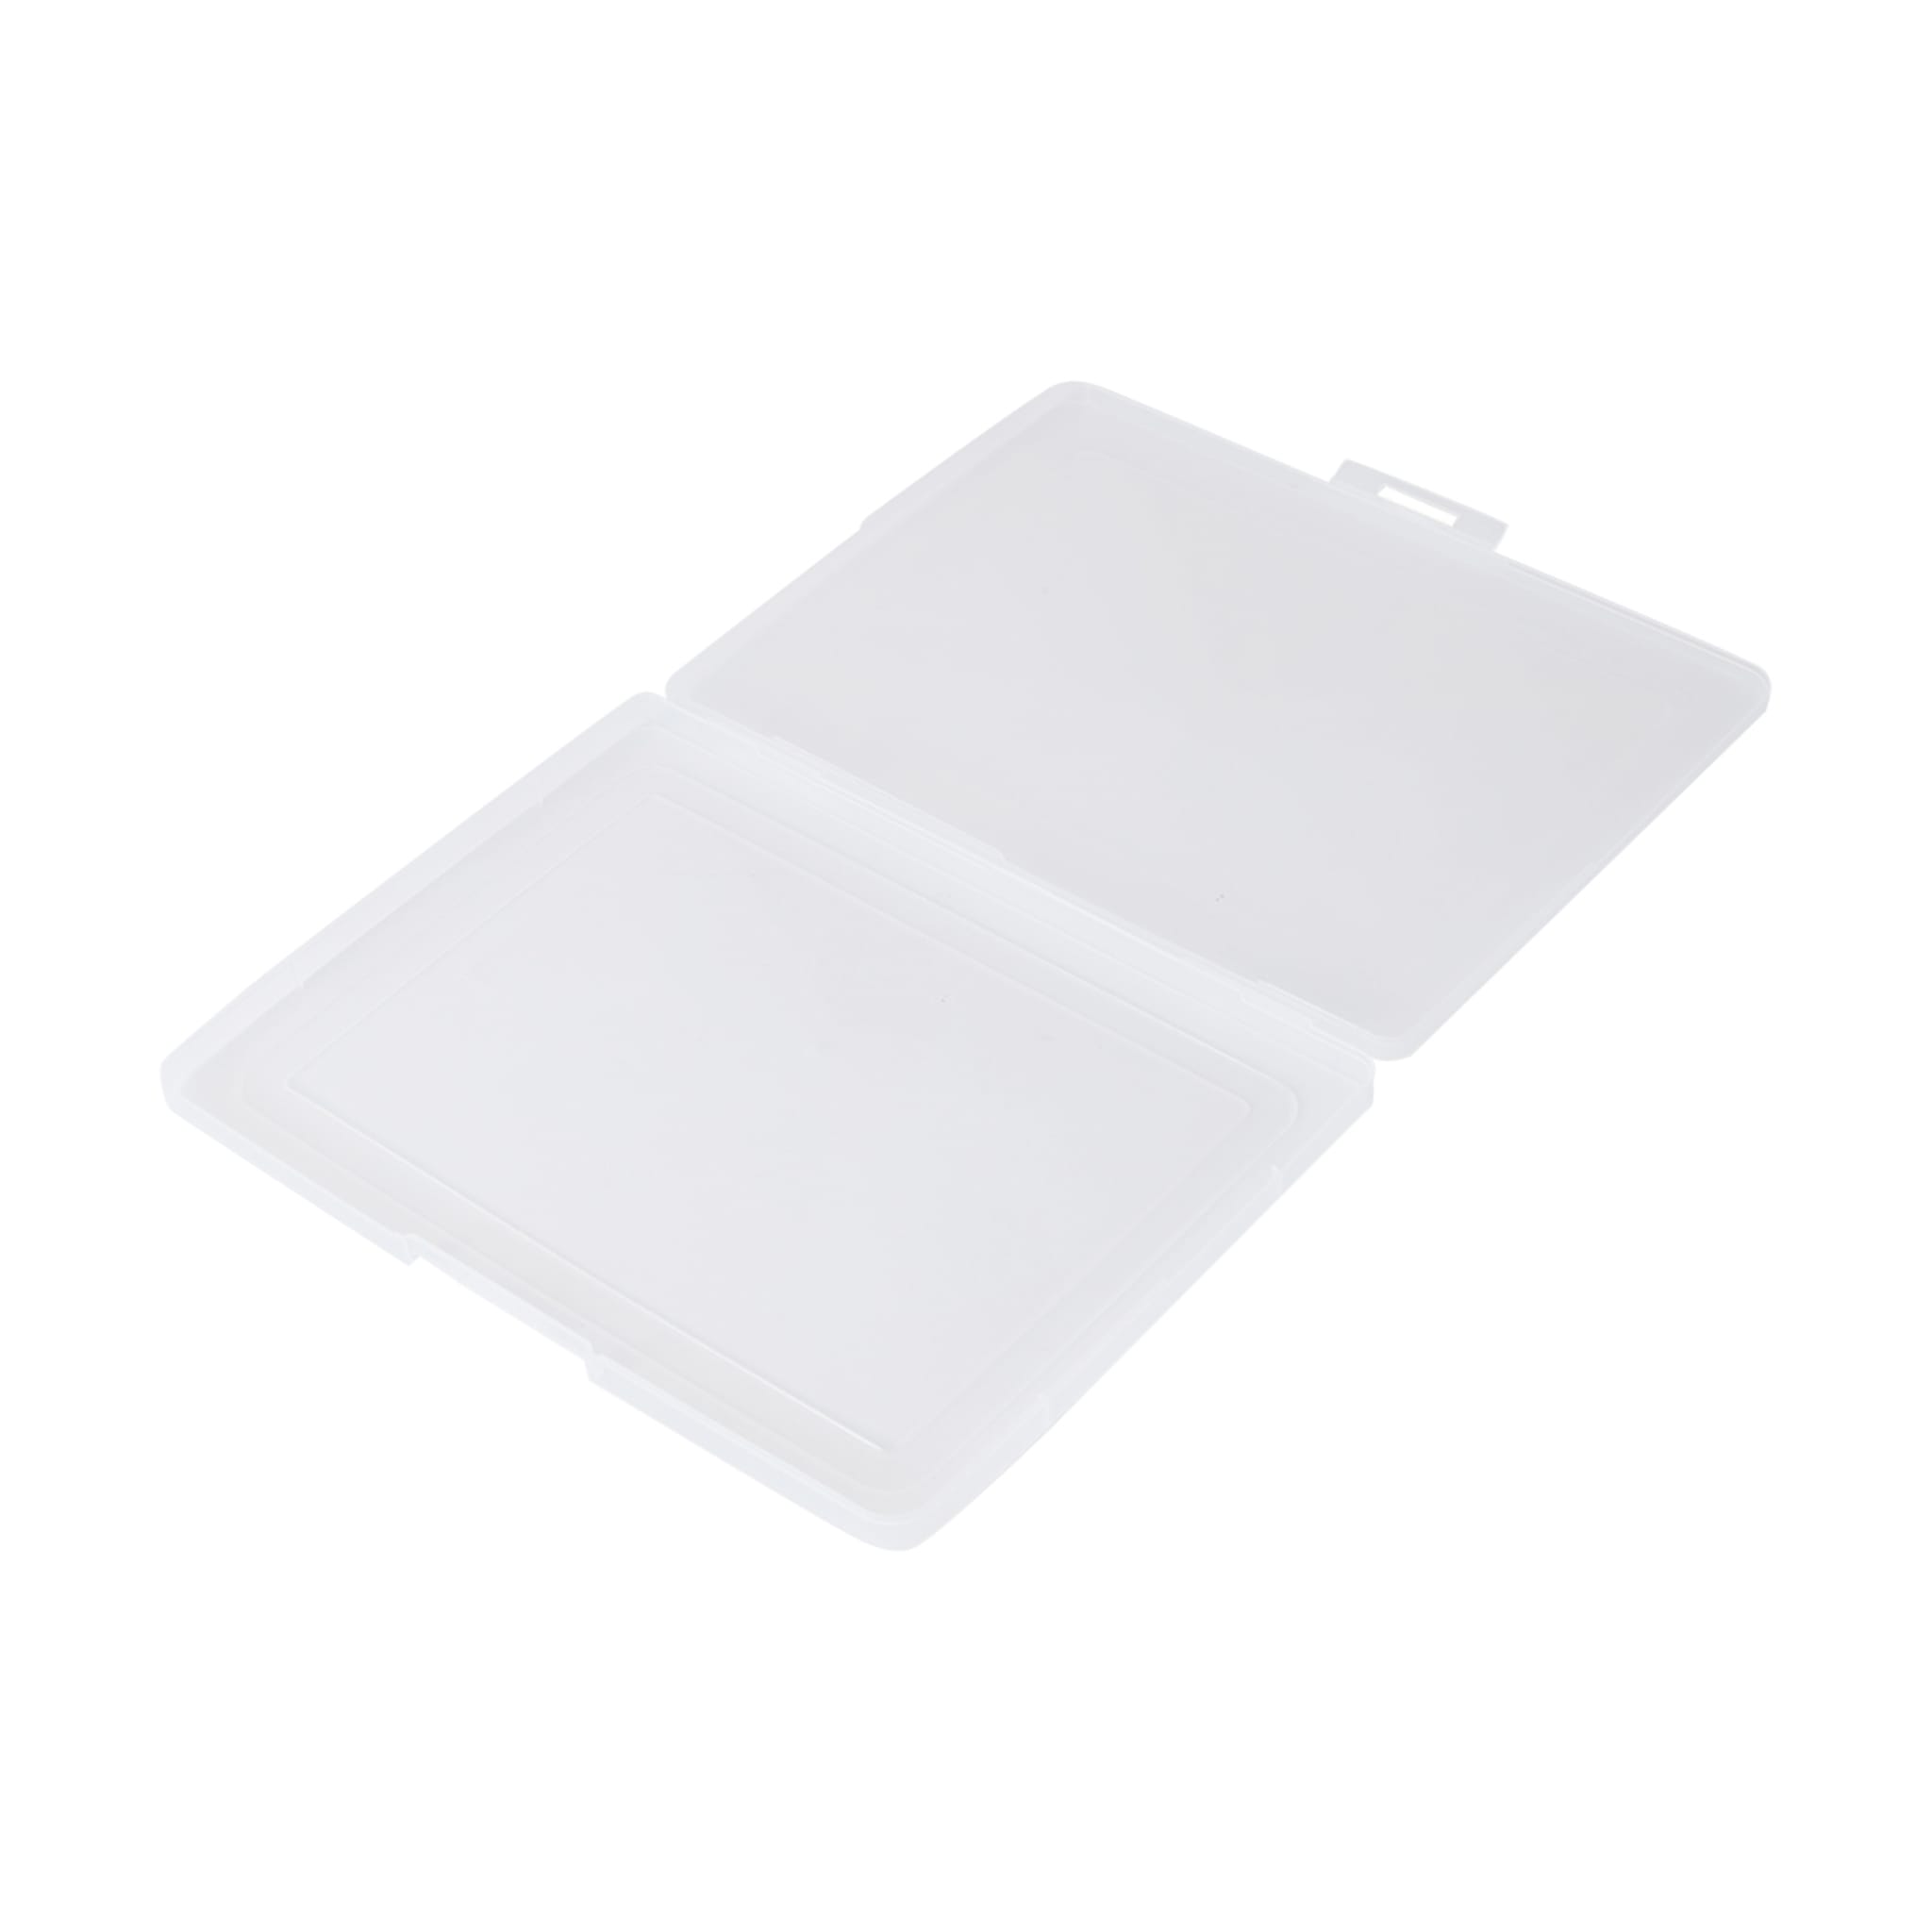 Clear Stationery Case - Kmart